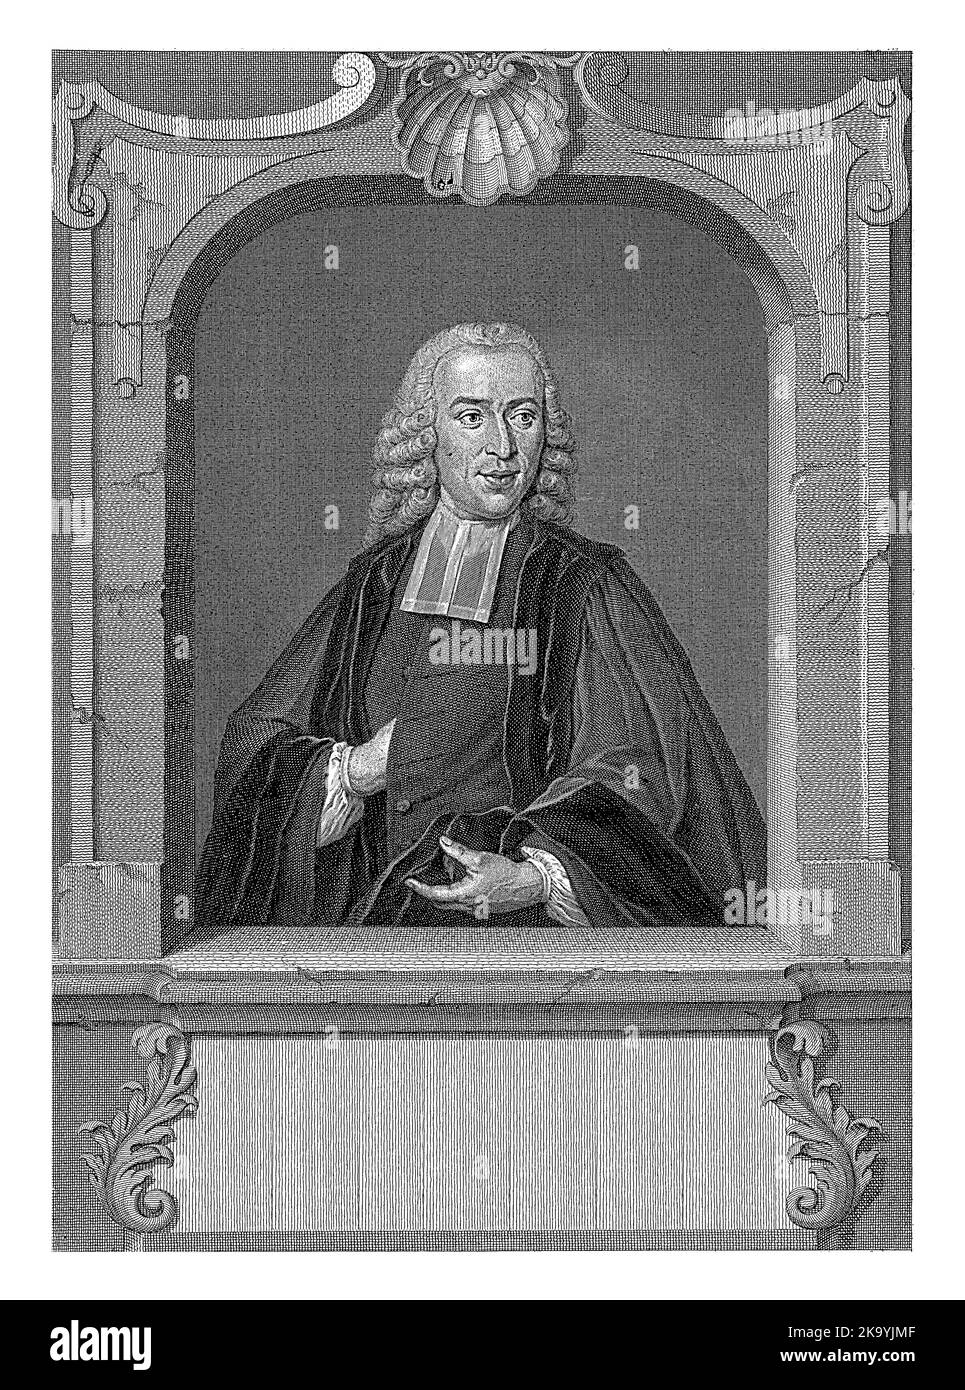 Half-length portrait of Johannes van Schelle at the age of 36 in an architectural window. Under the windowsill are name and information in three lines Stock Photo